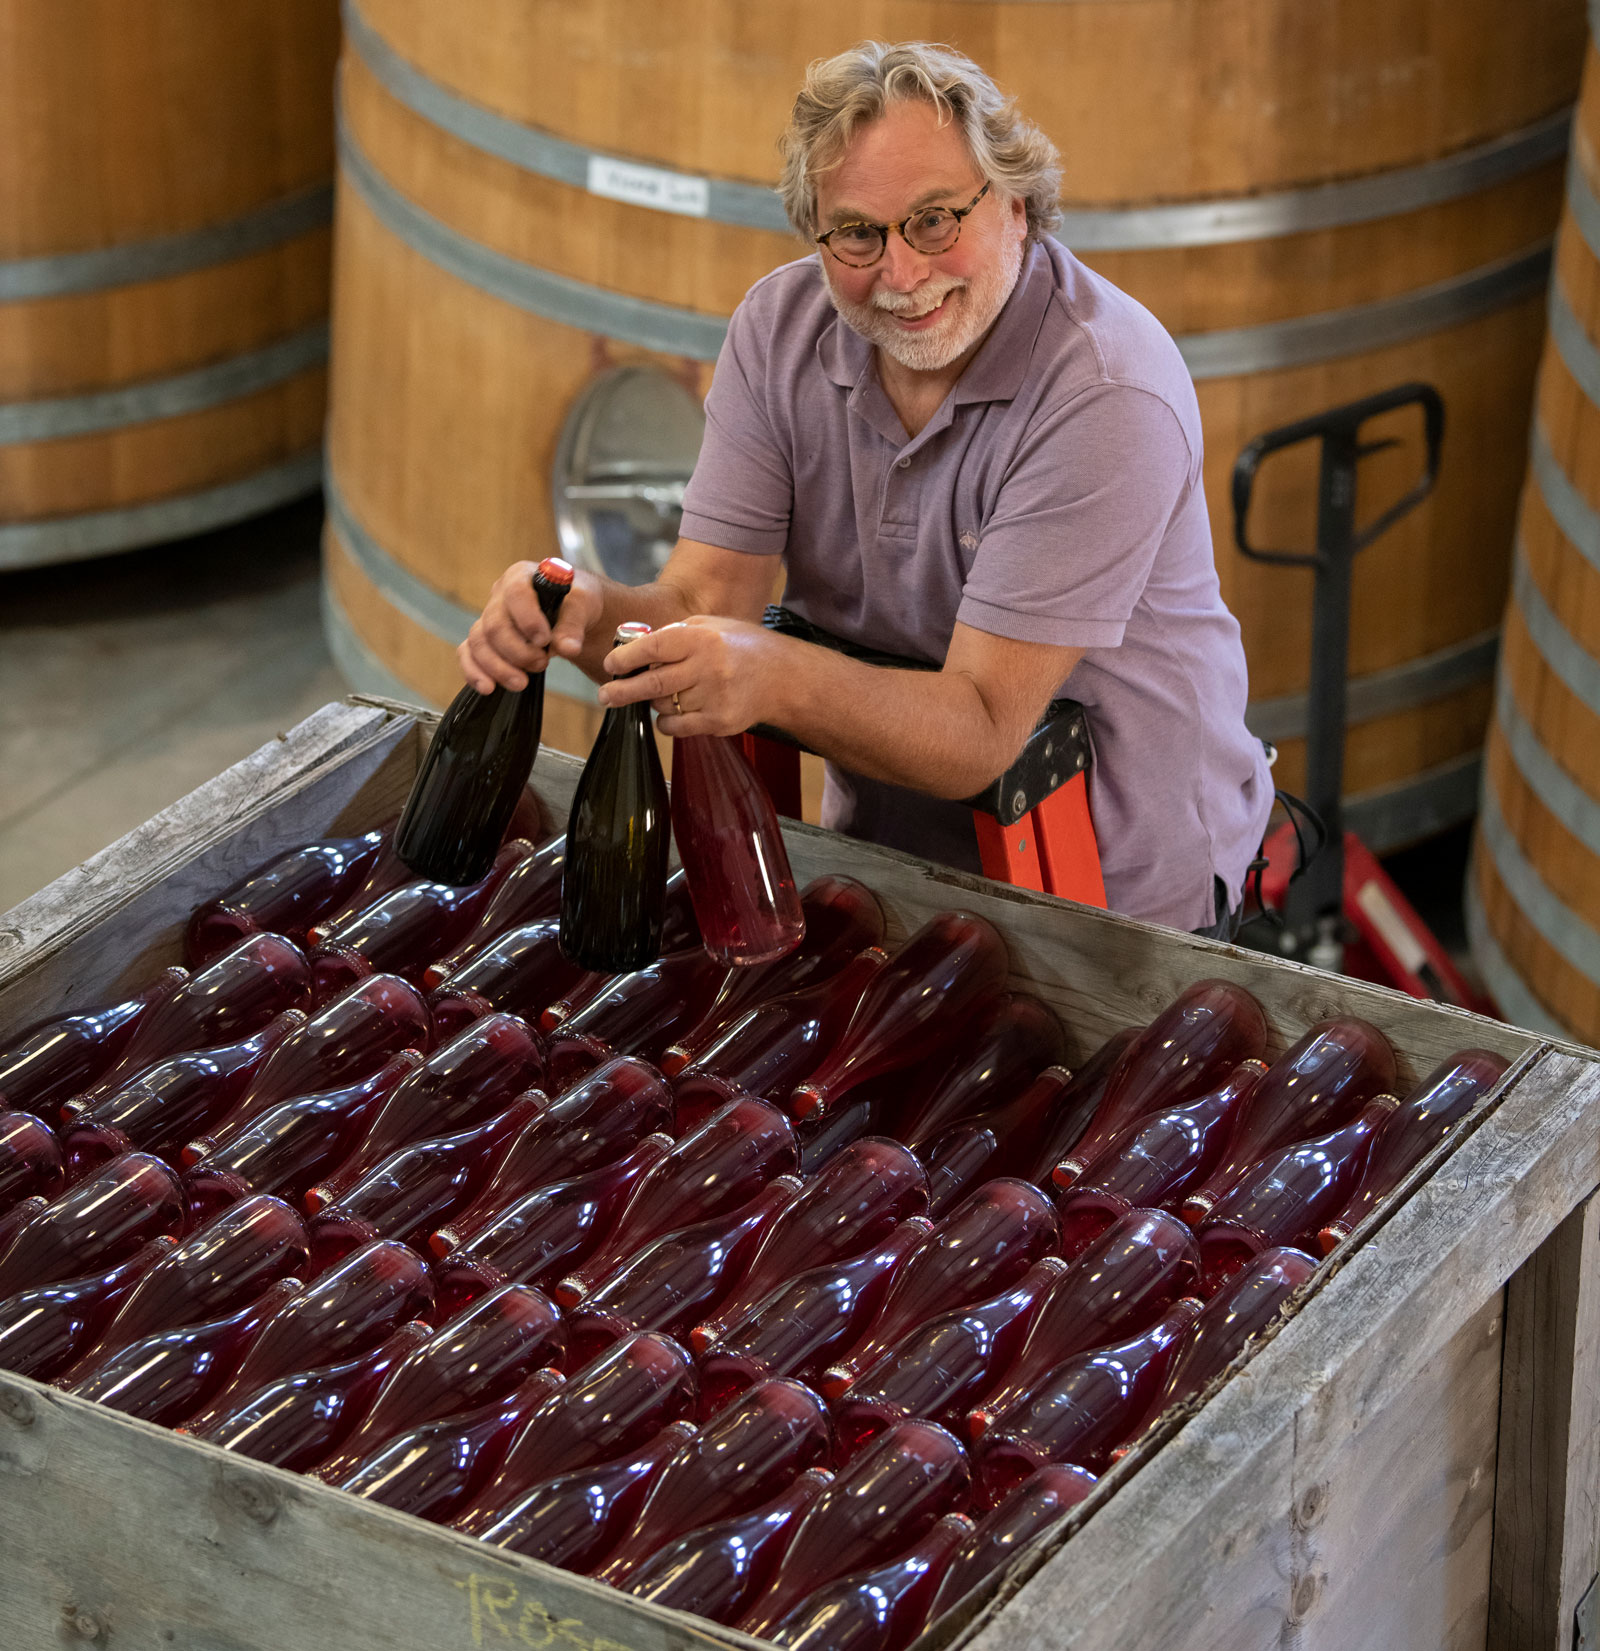 Mark Vlossak standing over a large container of sparkling wine bottles